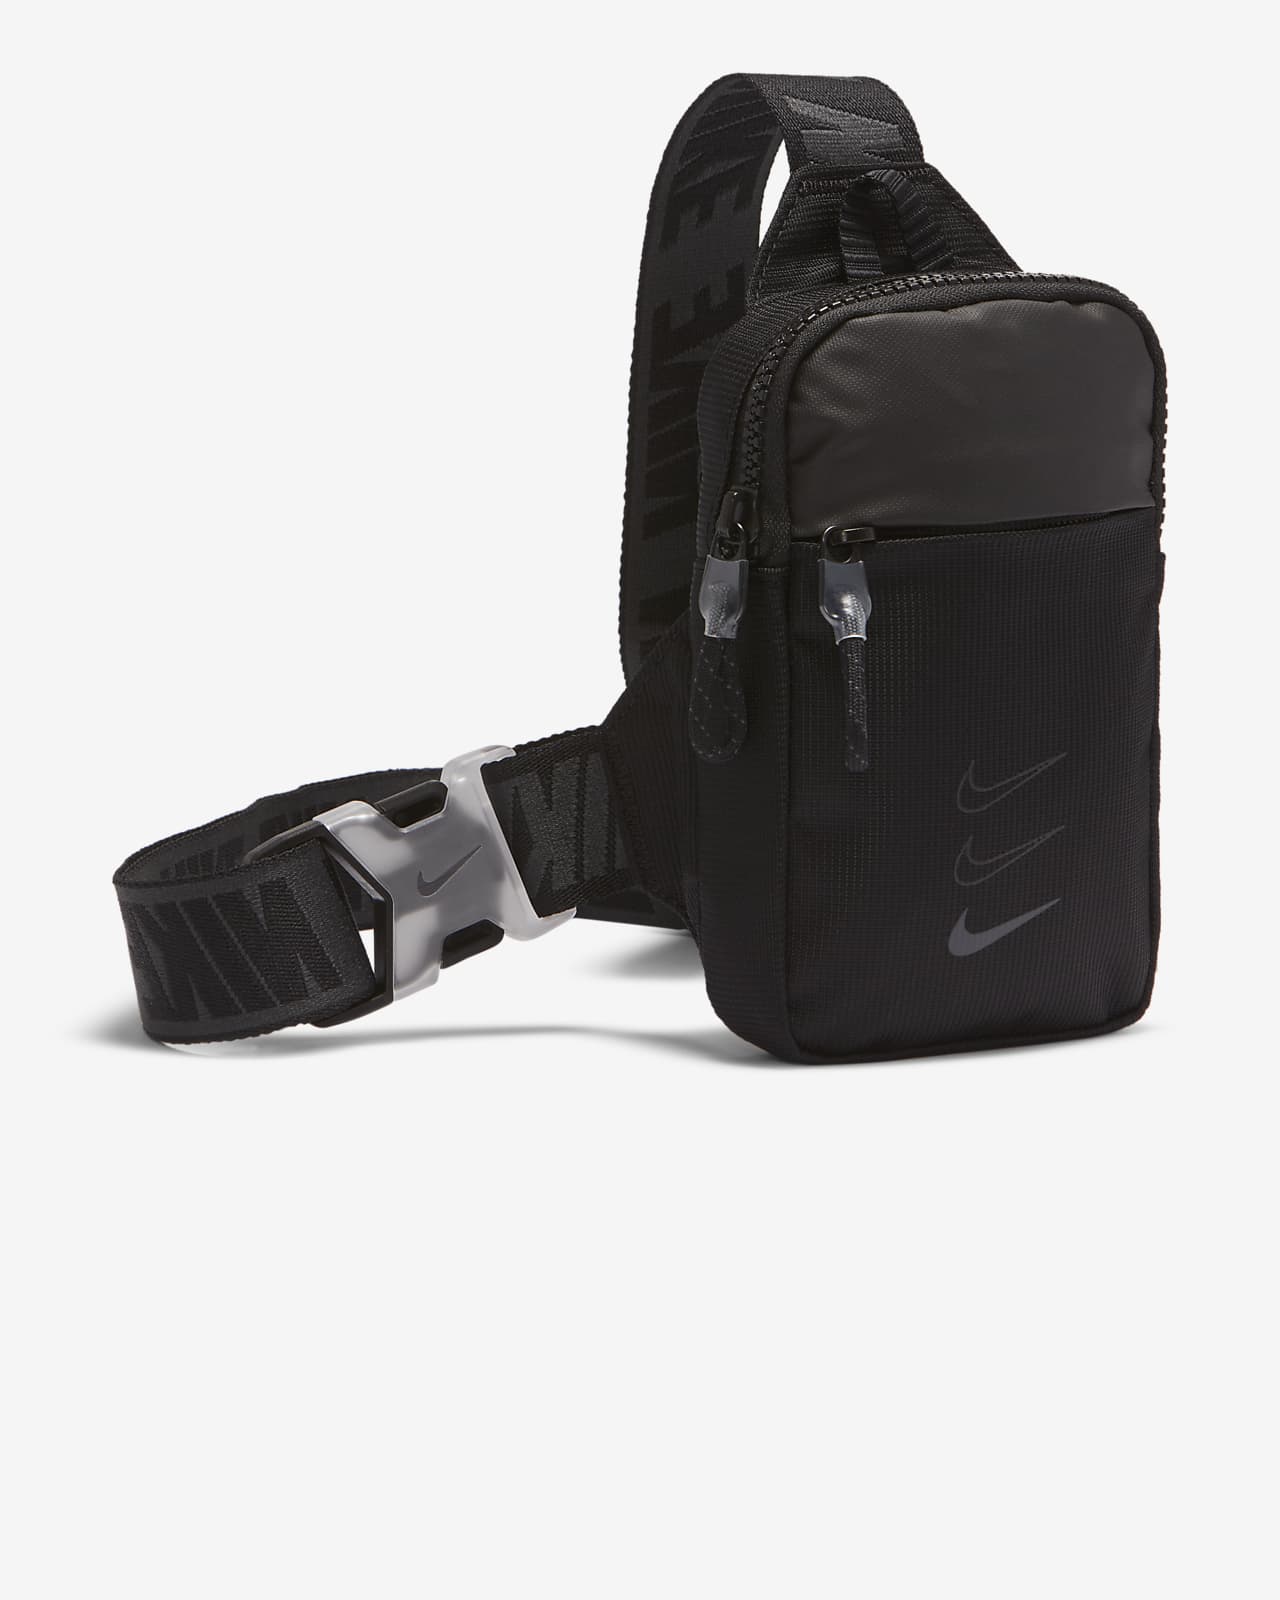 nike essential hip pack malaysia